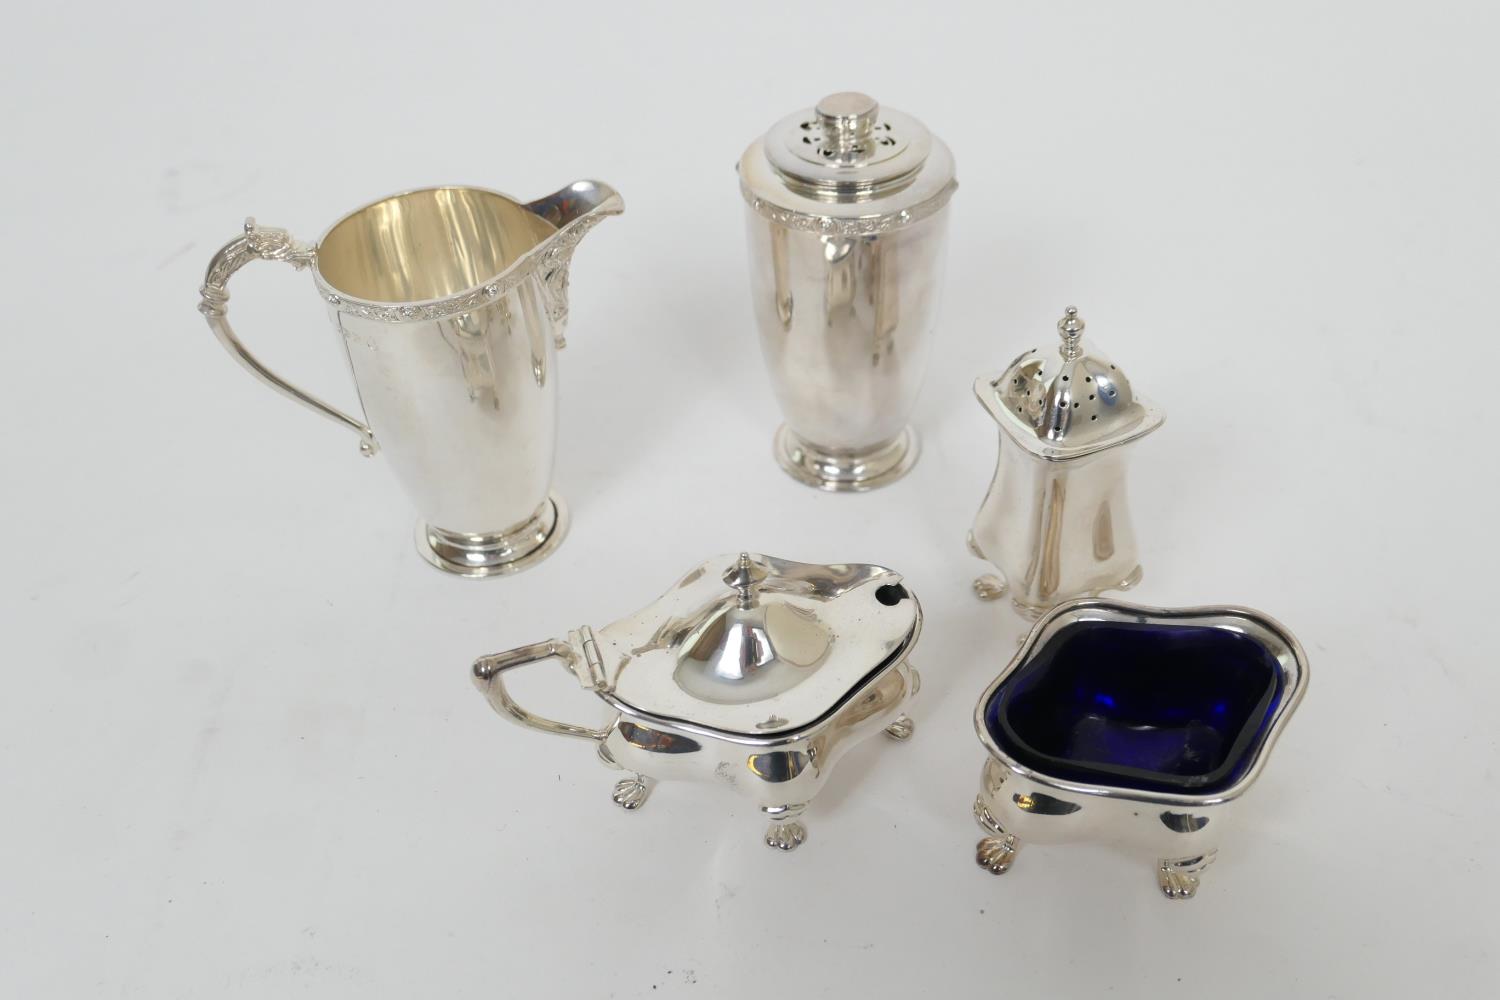 Coronation year silver strawberry set, by Adie Bros., Birmingham 1953, comprising sugar sifter and